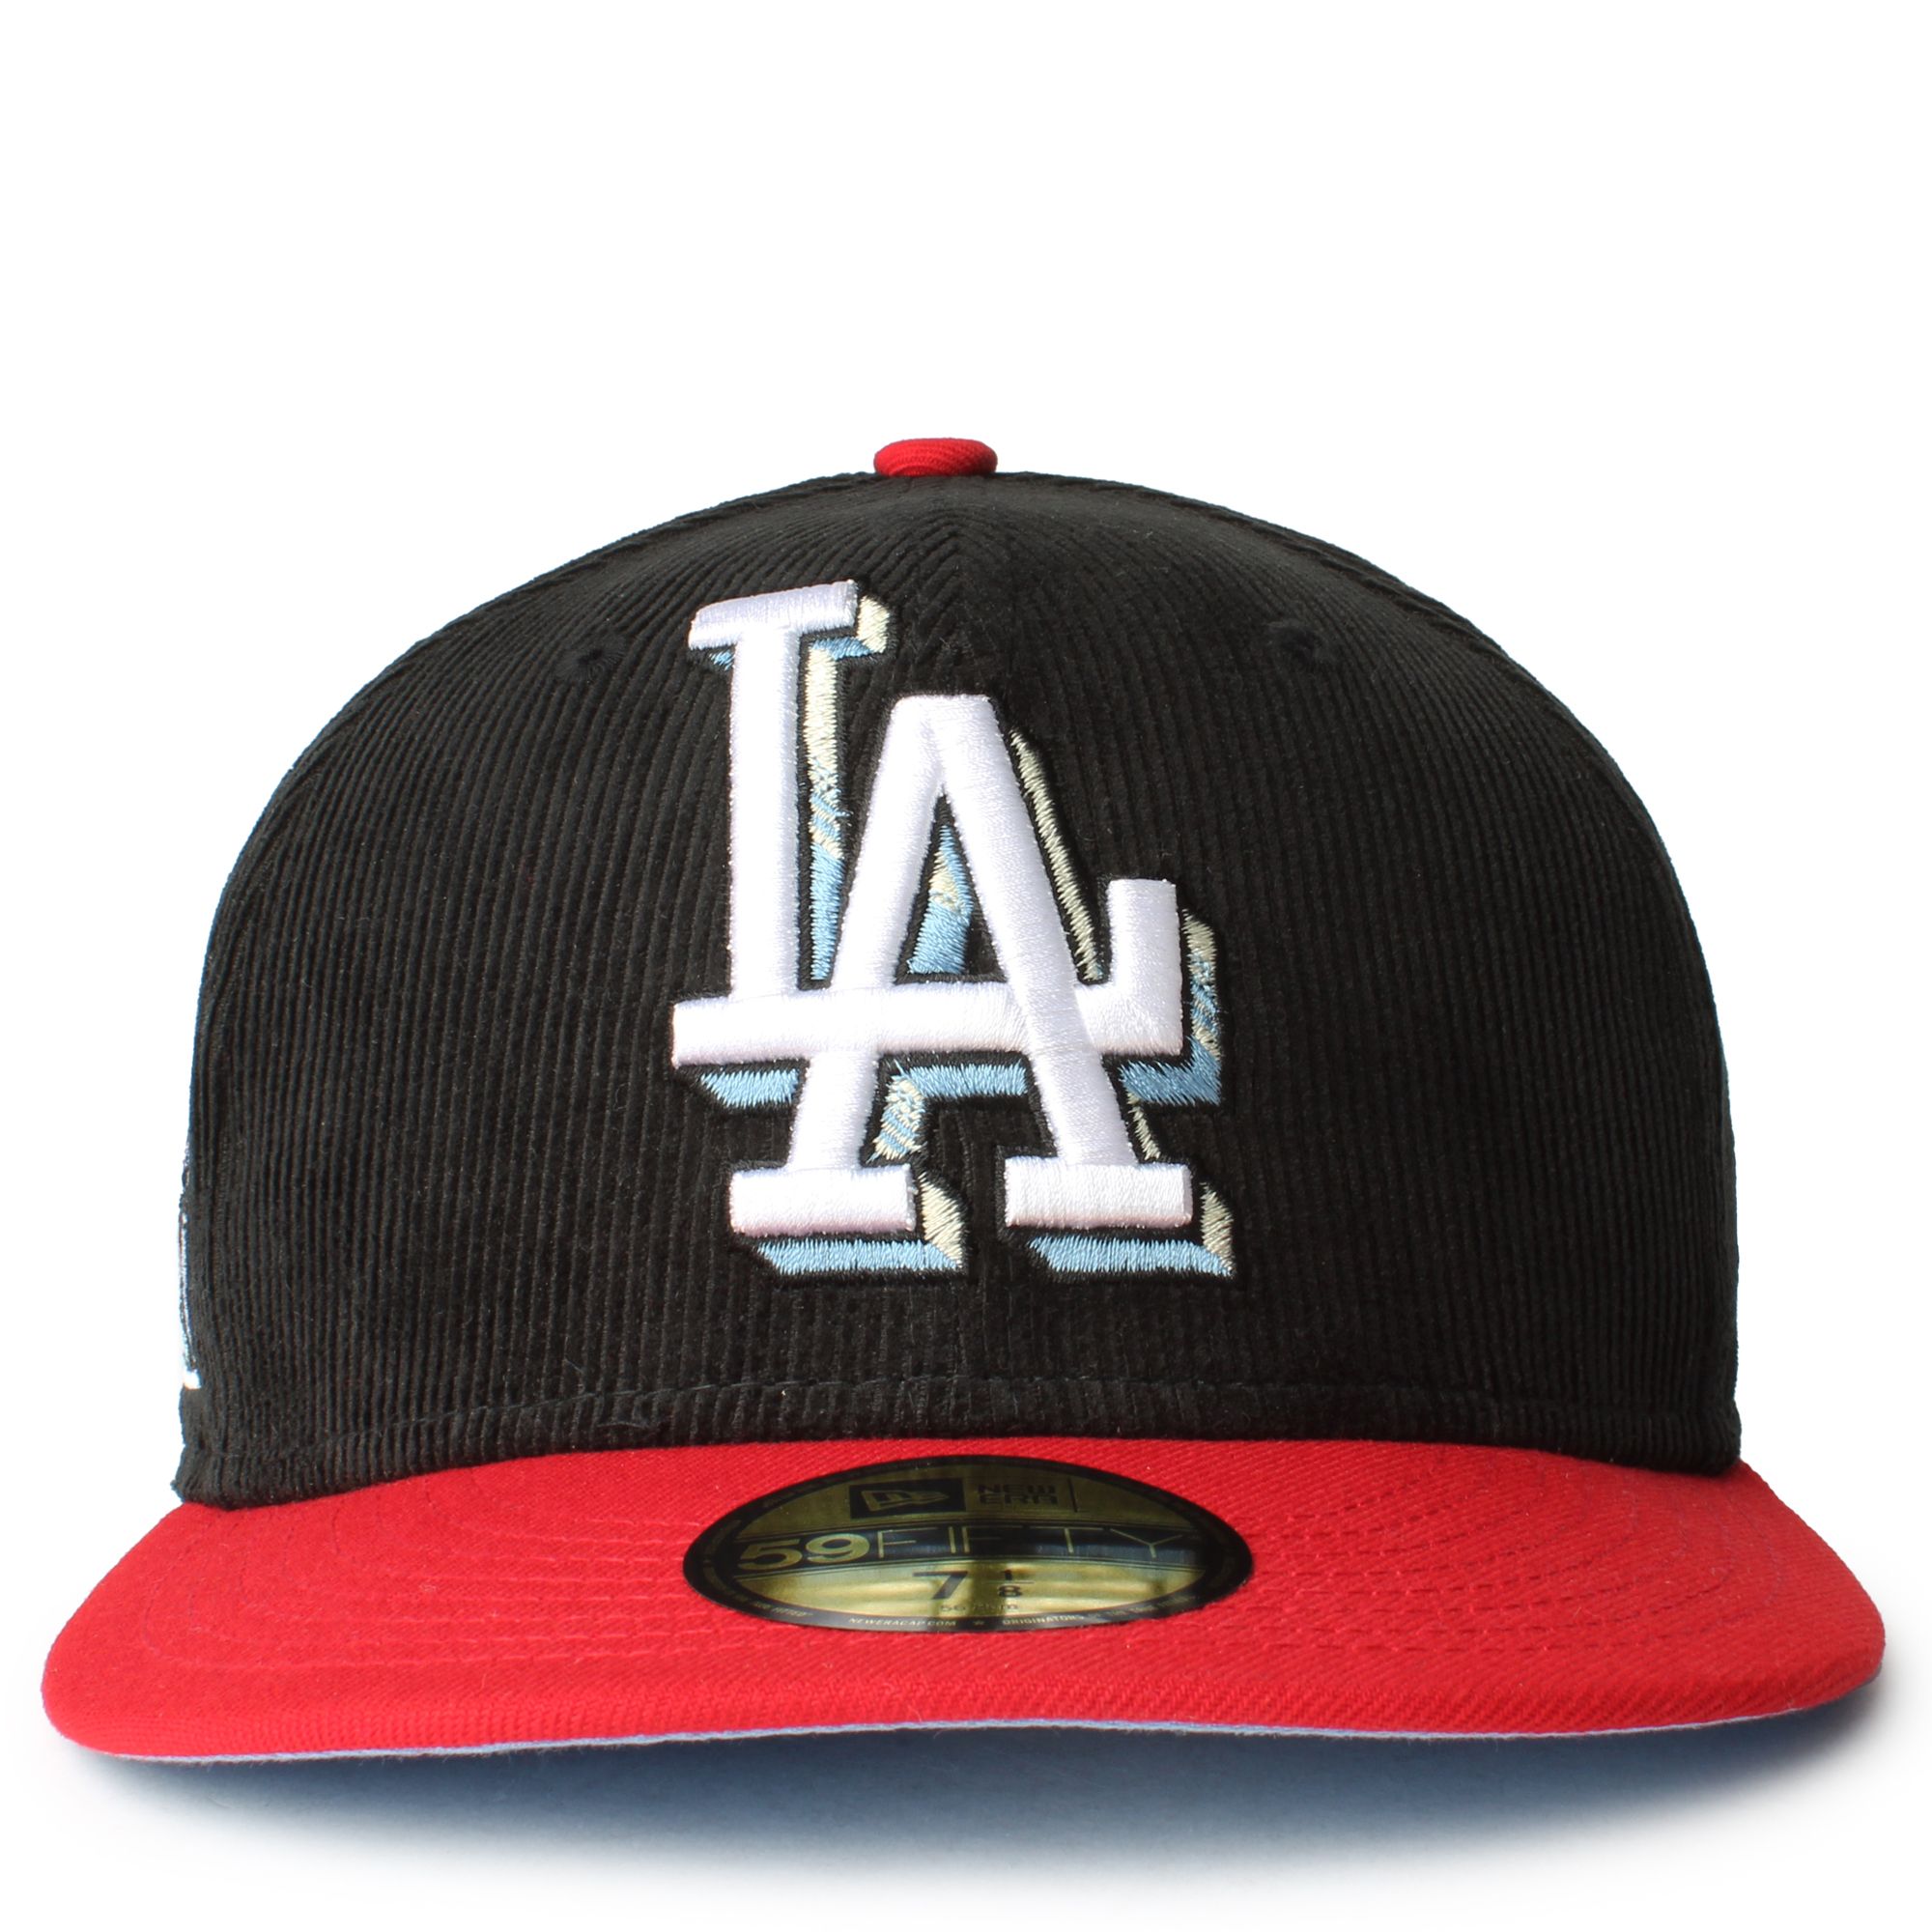  New Era 59Fifty Los Angeles Dodgers LA Fitted Hat